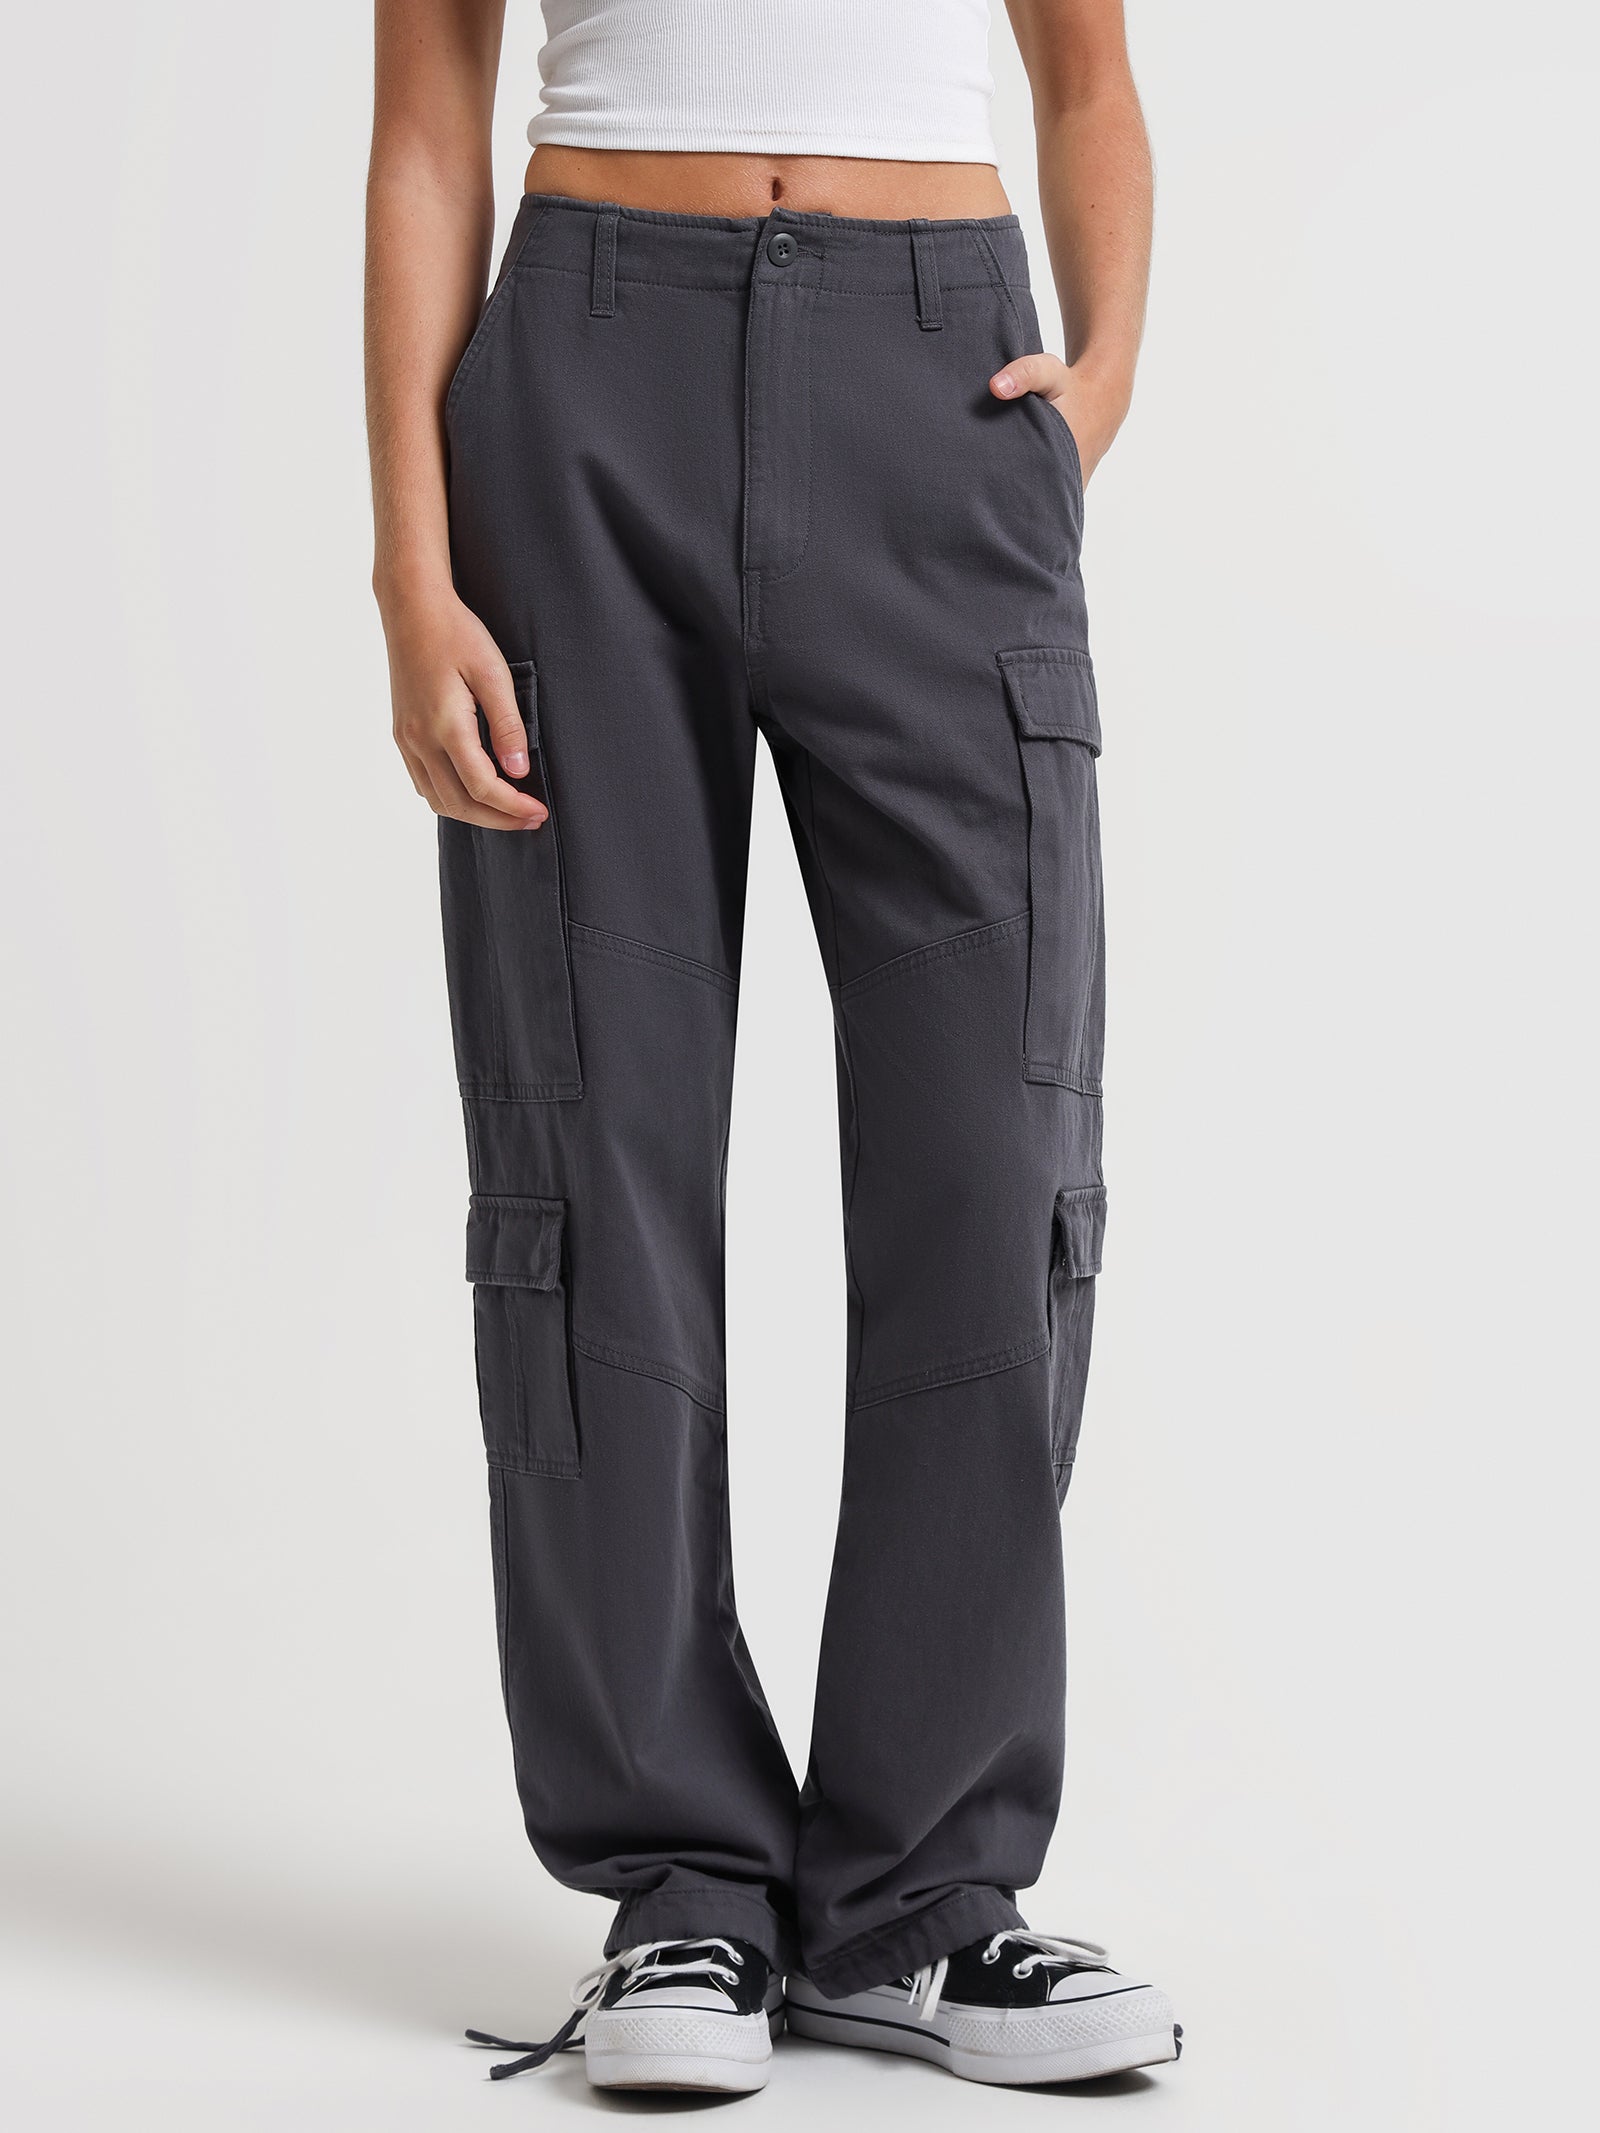 Surplus Cargo Pants in Charcoal - Glue Store